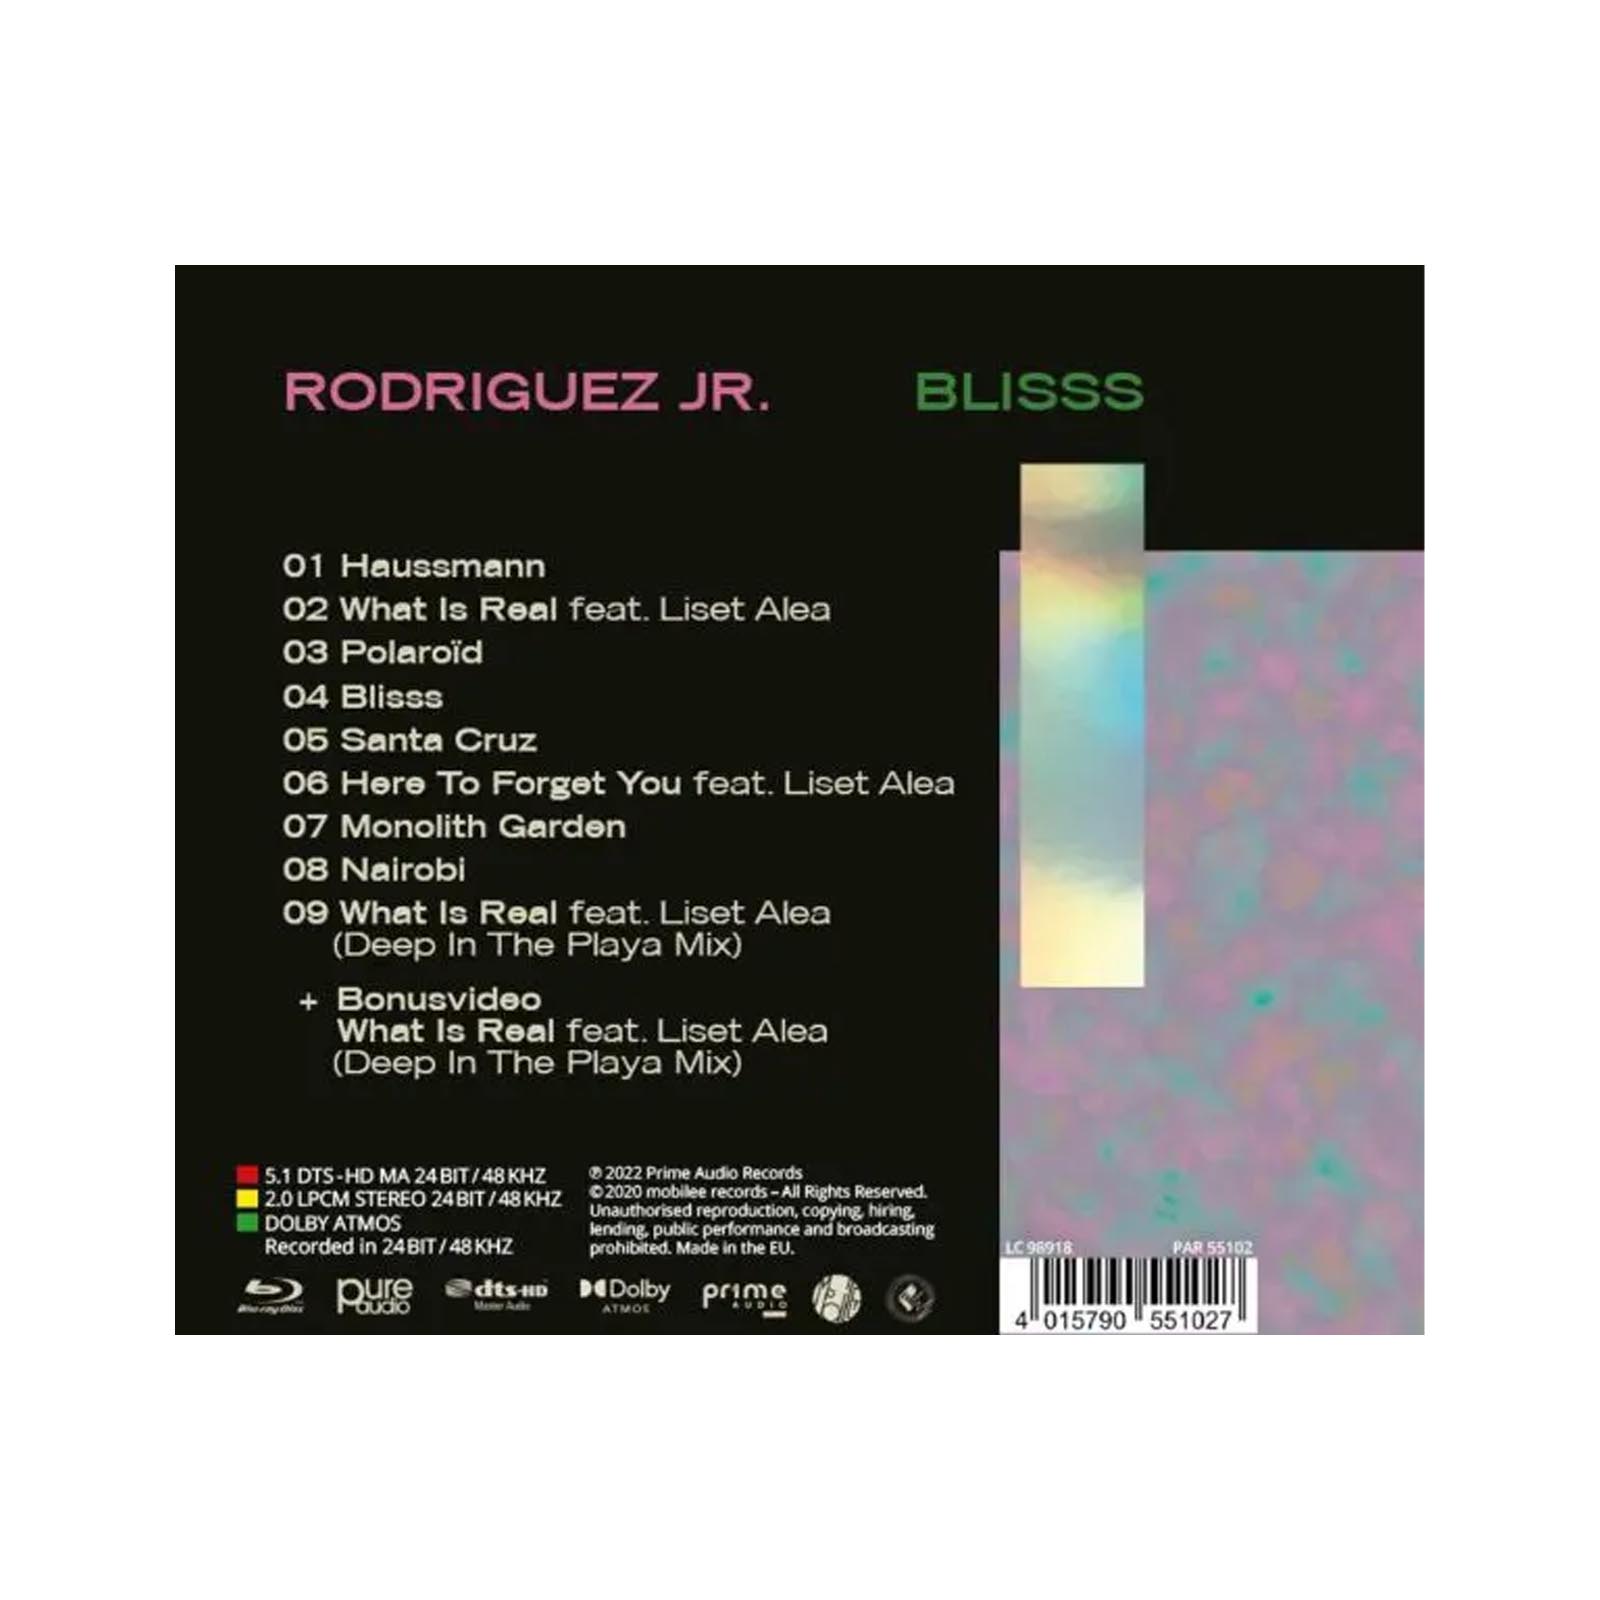 Rodriguez Jr. – BLISSS (Édition Dolby Atmos) (2)